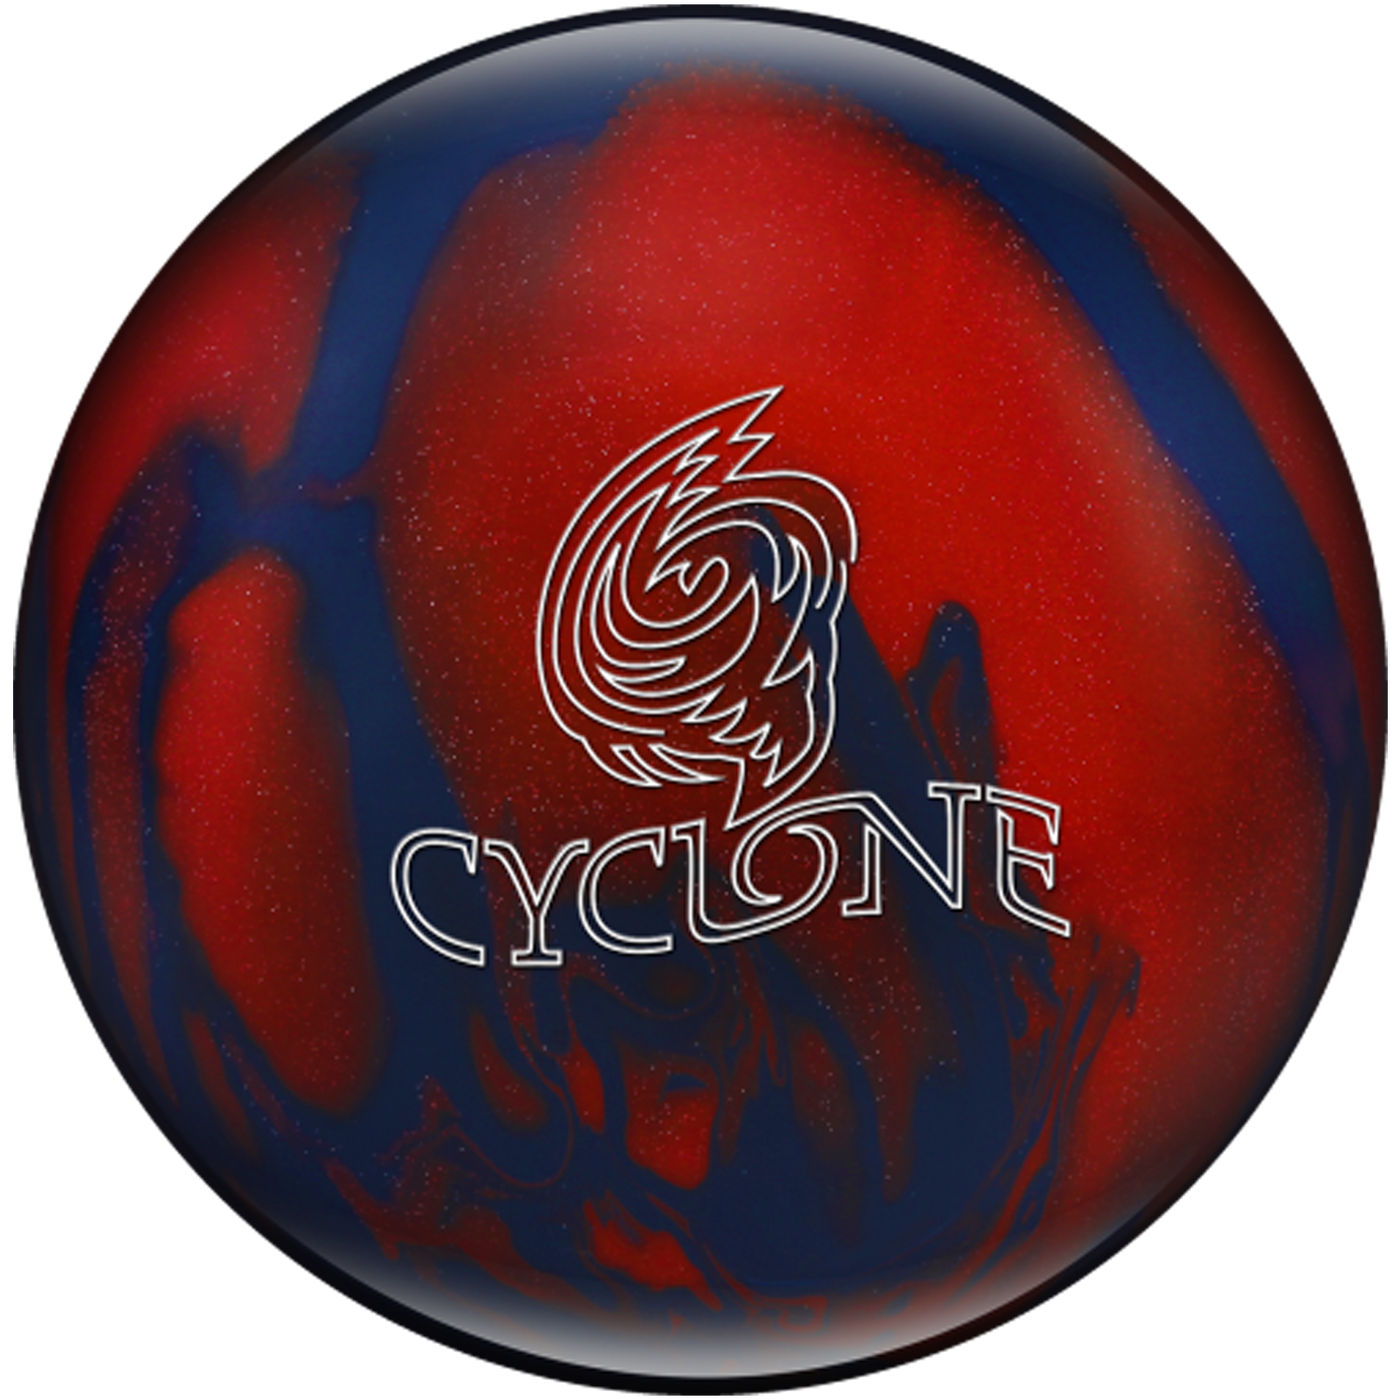 Cyclone Blue/Red Sparkle Bowling Ball